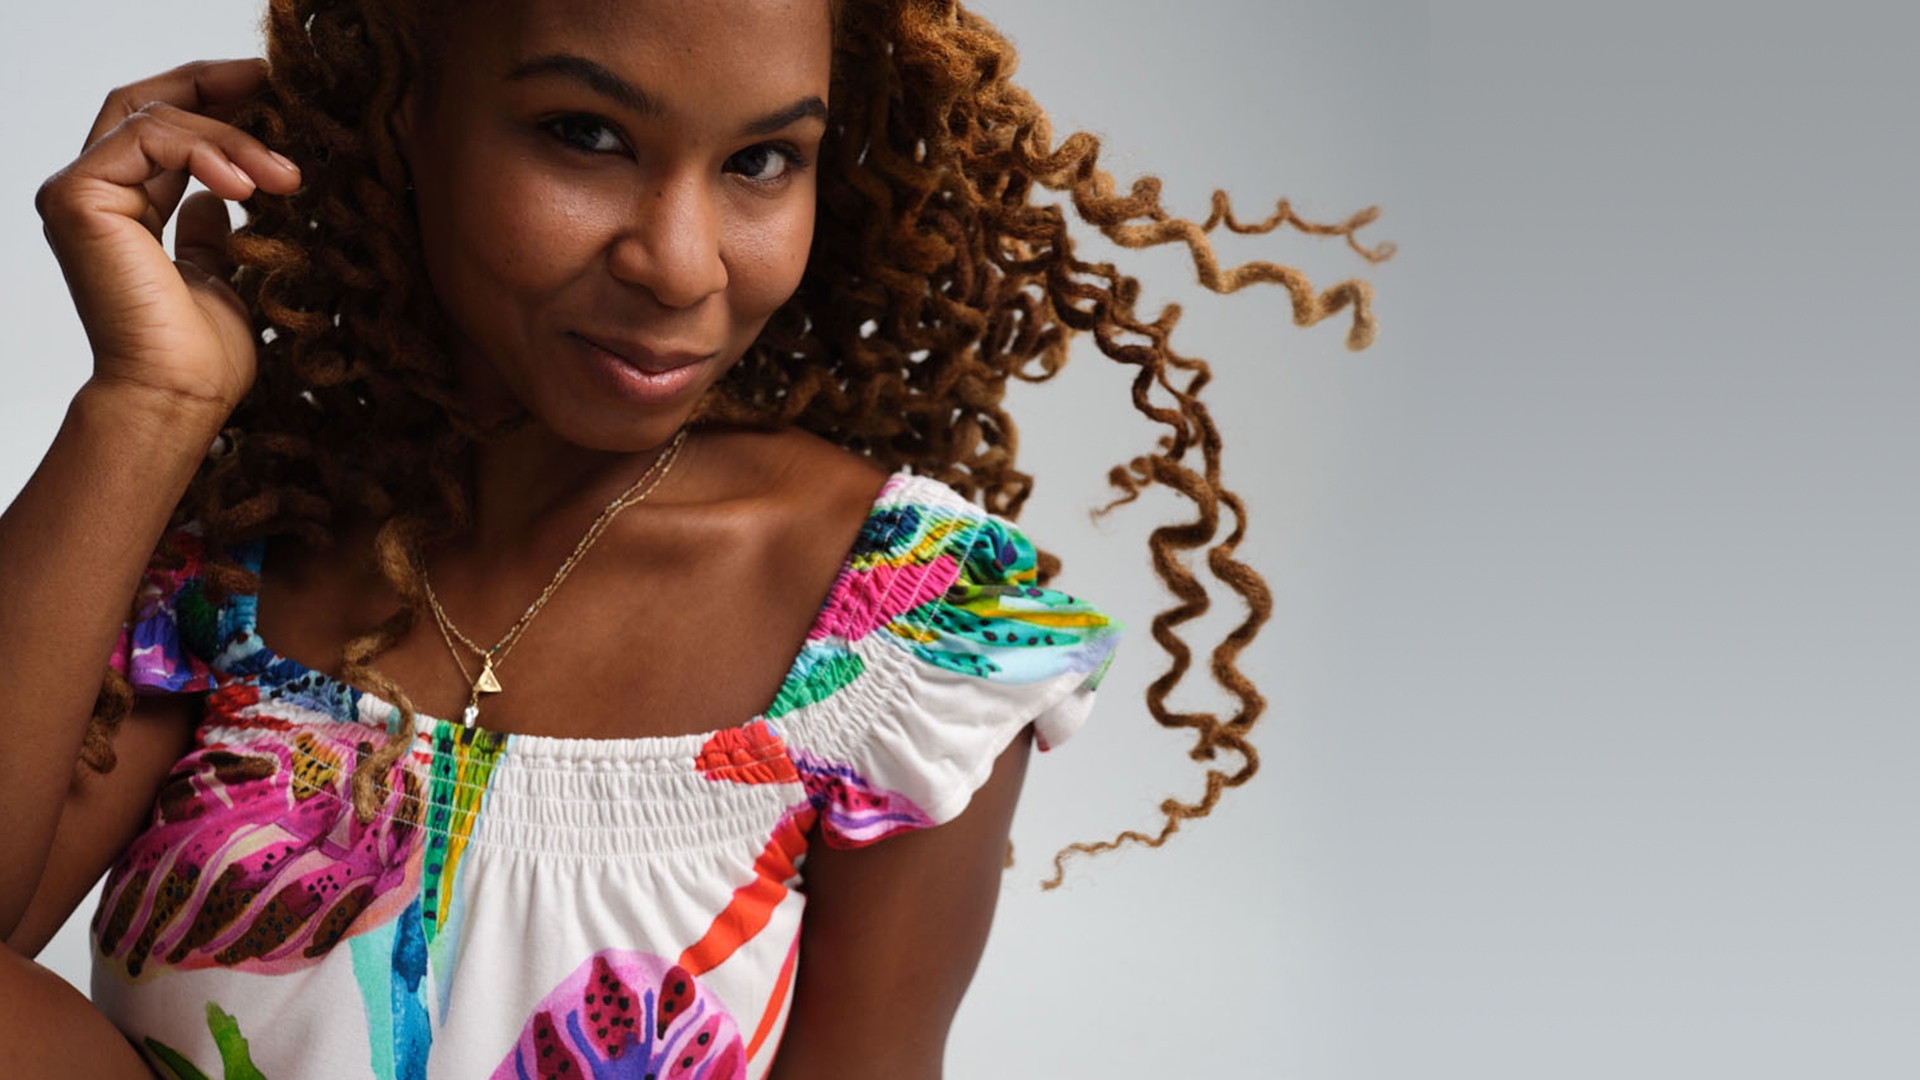 Soma women’s model wearing gold necklaces and a colorful tropical print pajama top.